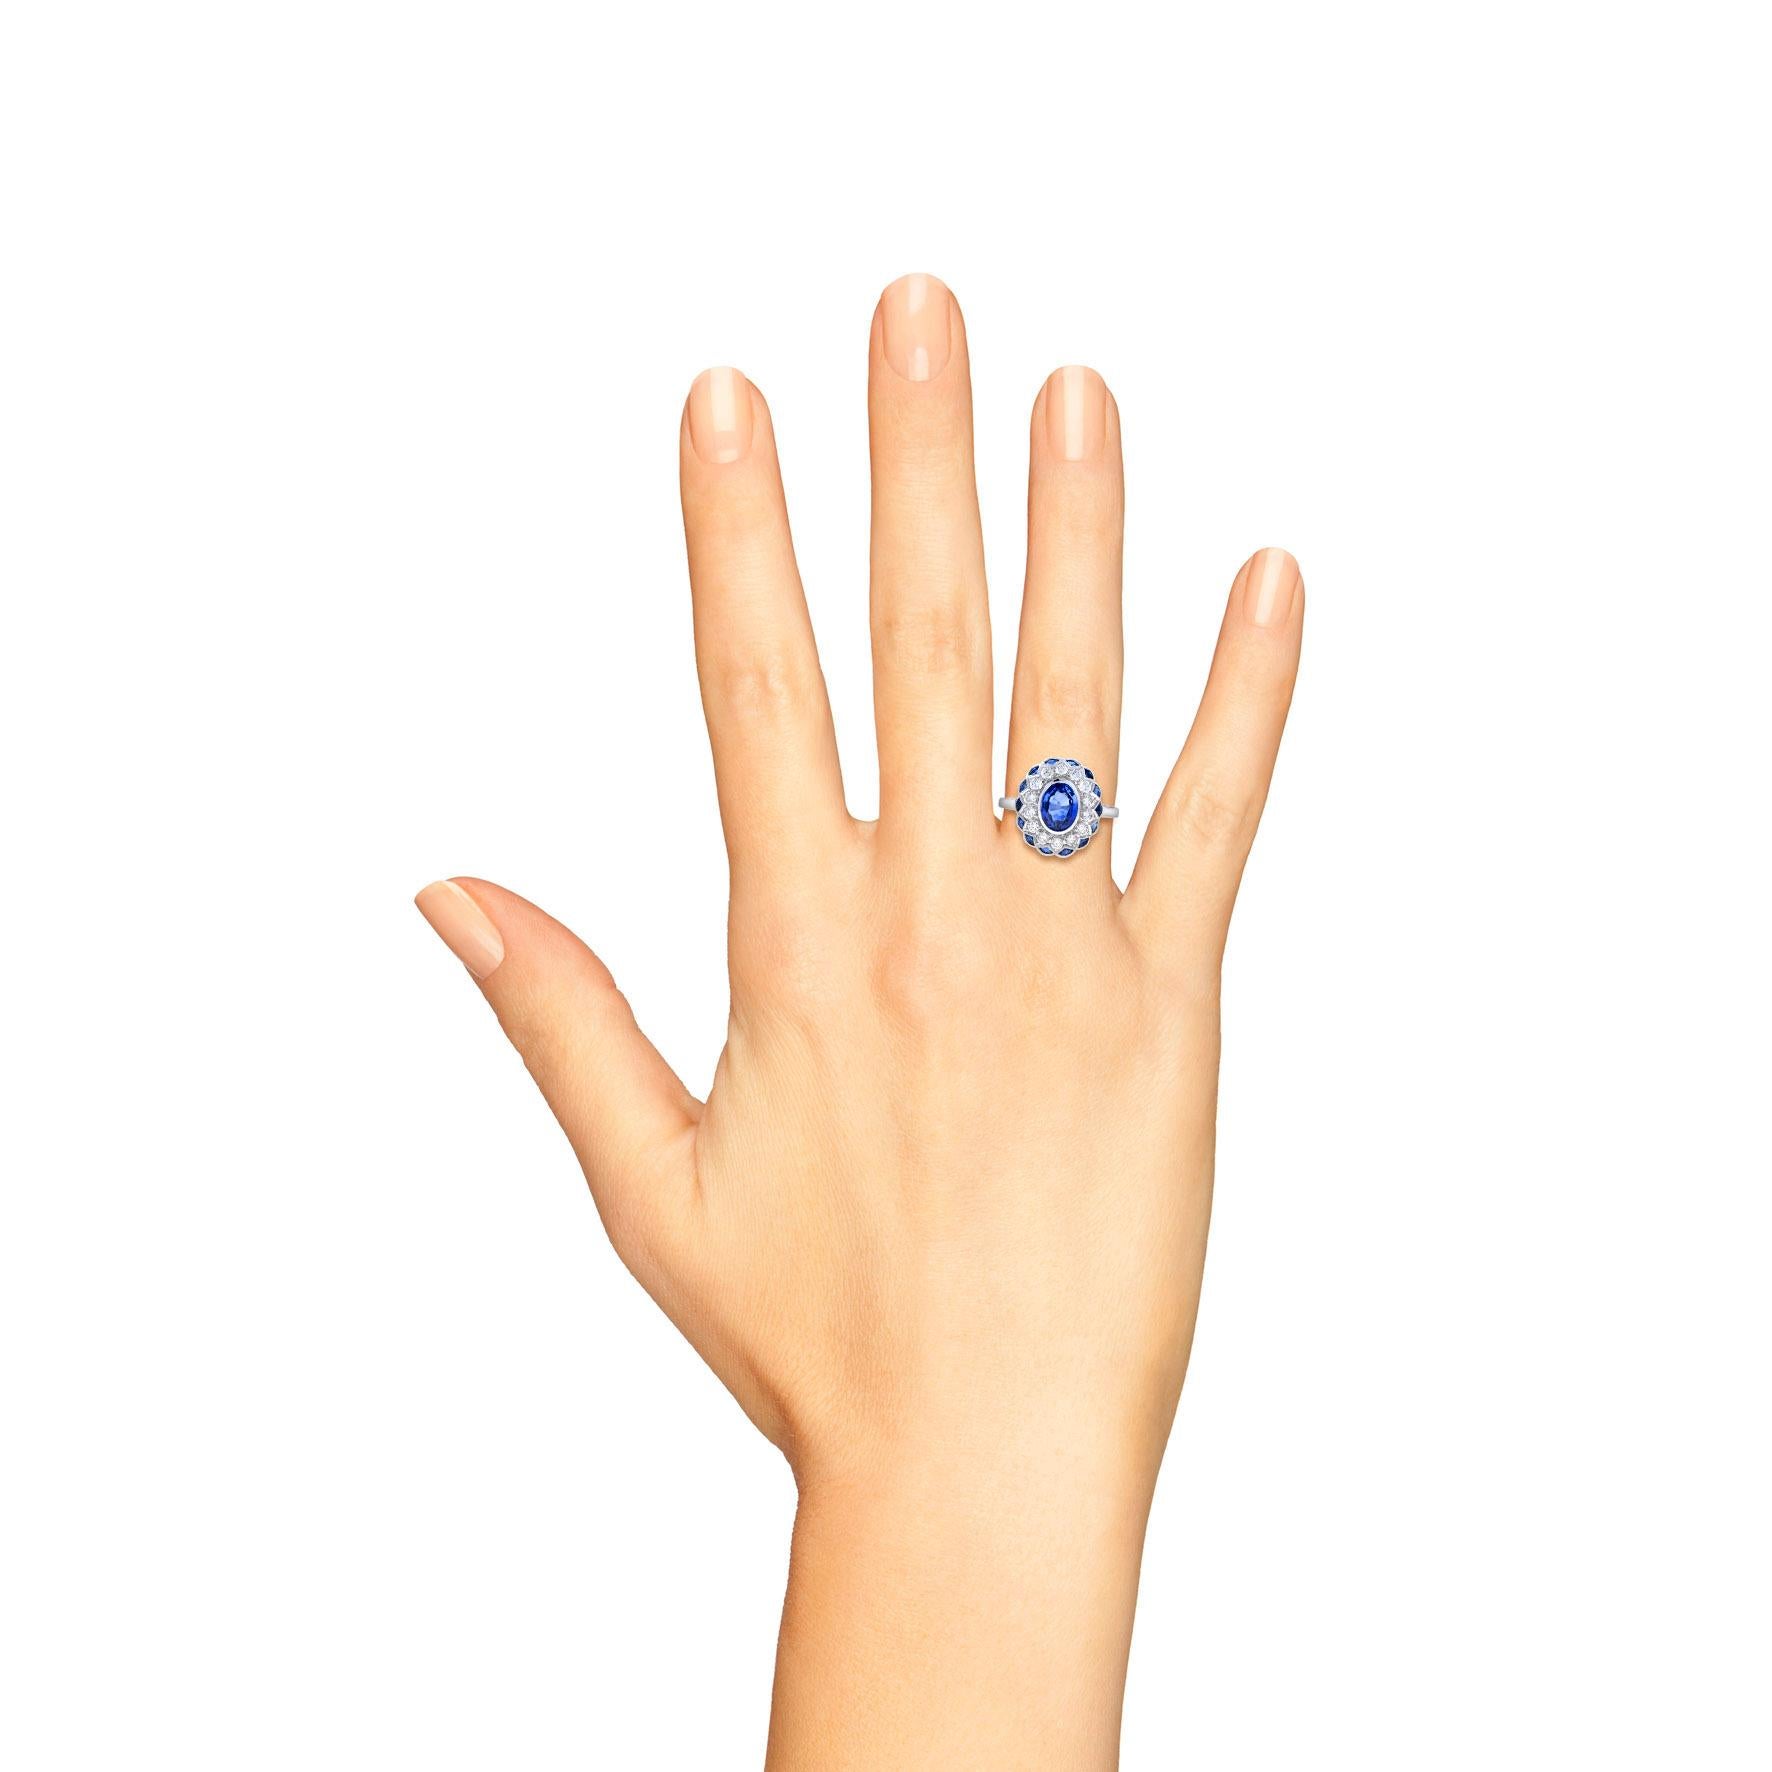 A breathtaking Ceylon sapphire and diamond flower ring, it’s artfully handmade of luxurious 18k white gold, and high-polished for shimmering smooth finish. The center features oval natural Ceylon sapphire of 1.53 carats that is highlighted by icy